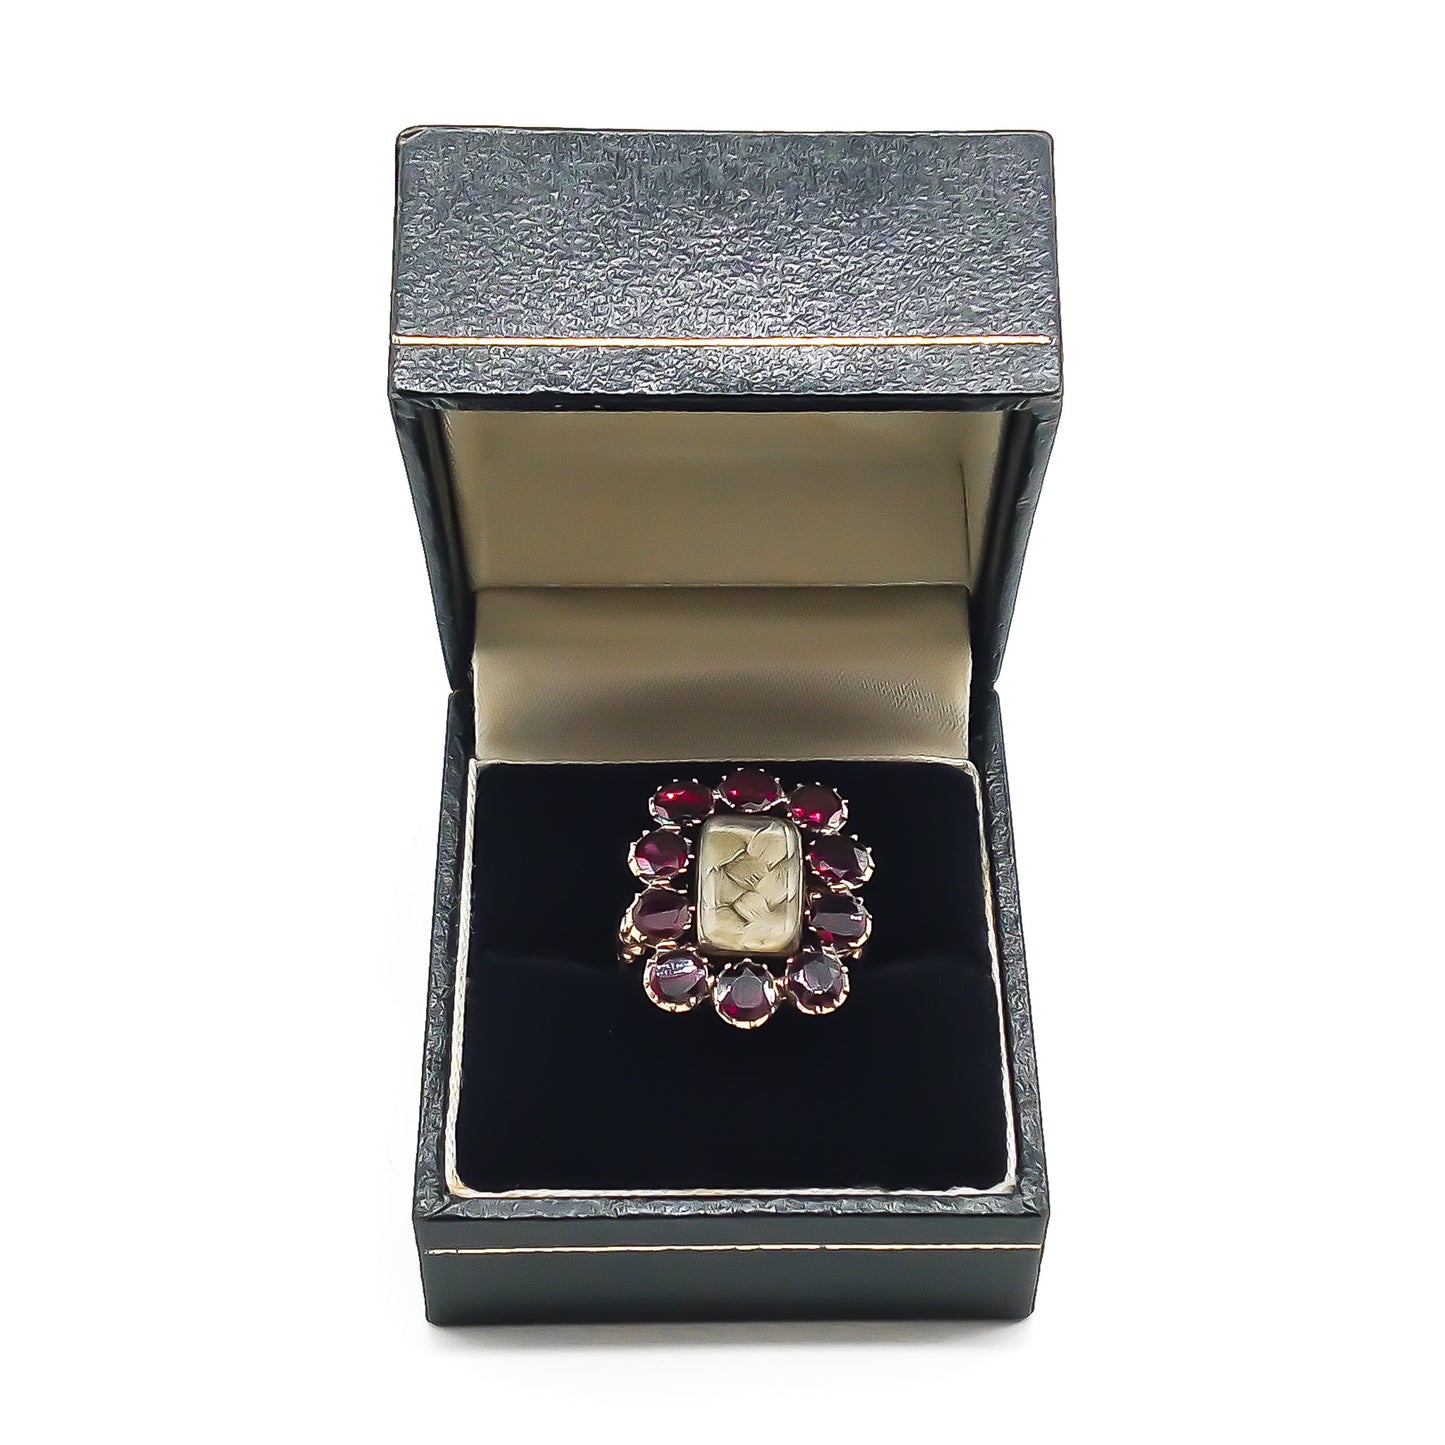 Stunning Georgian mourning ring in a 15ct yellow gold setting with plaited hair under bevelled glass, surrounded by ten beautiful deep red flat cut garnets. Later shank with lovely engraving.